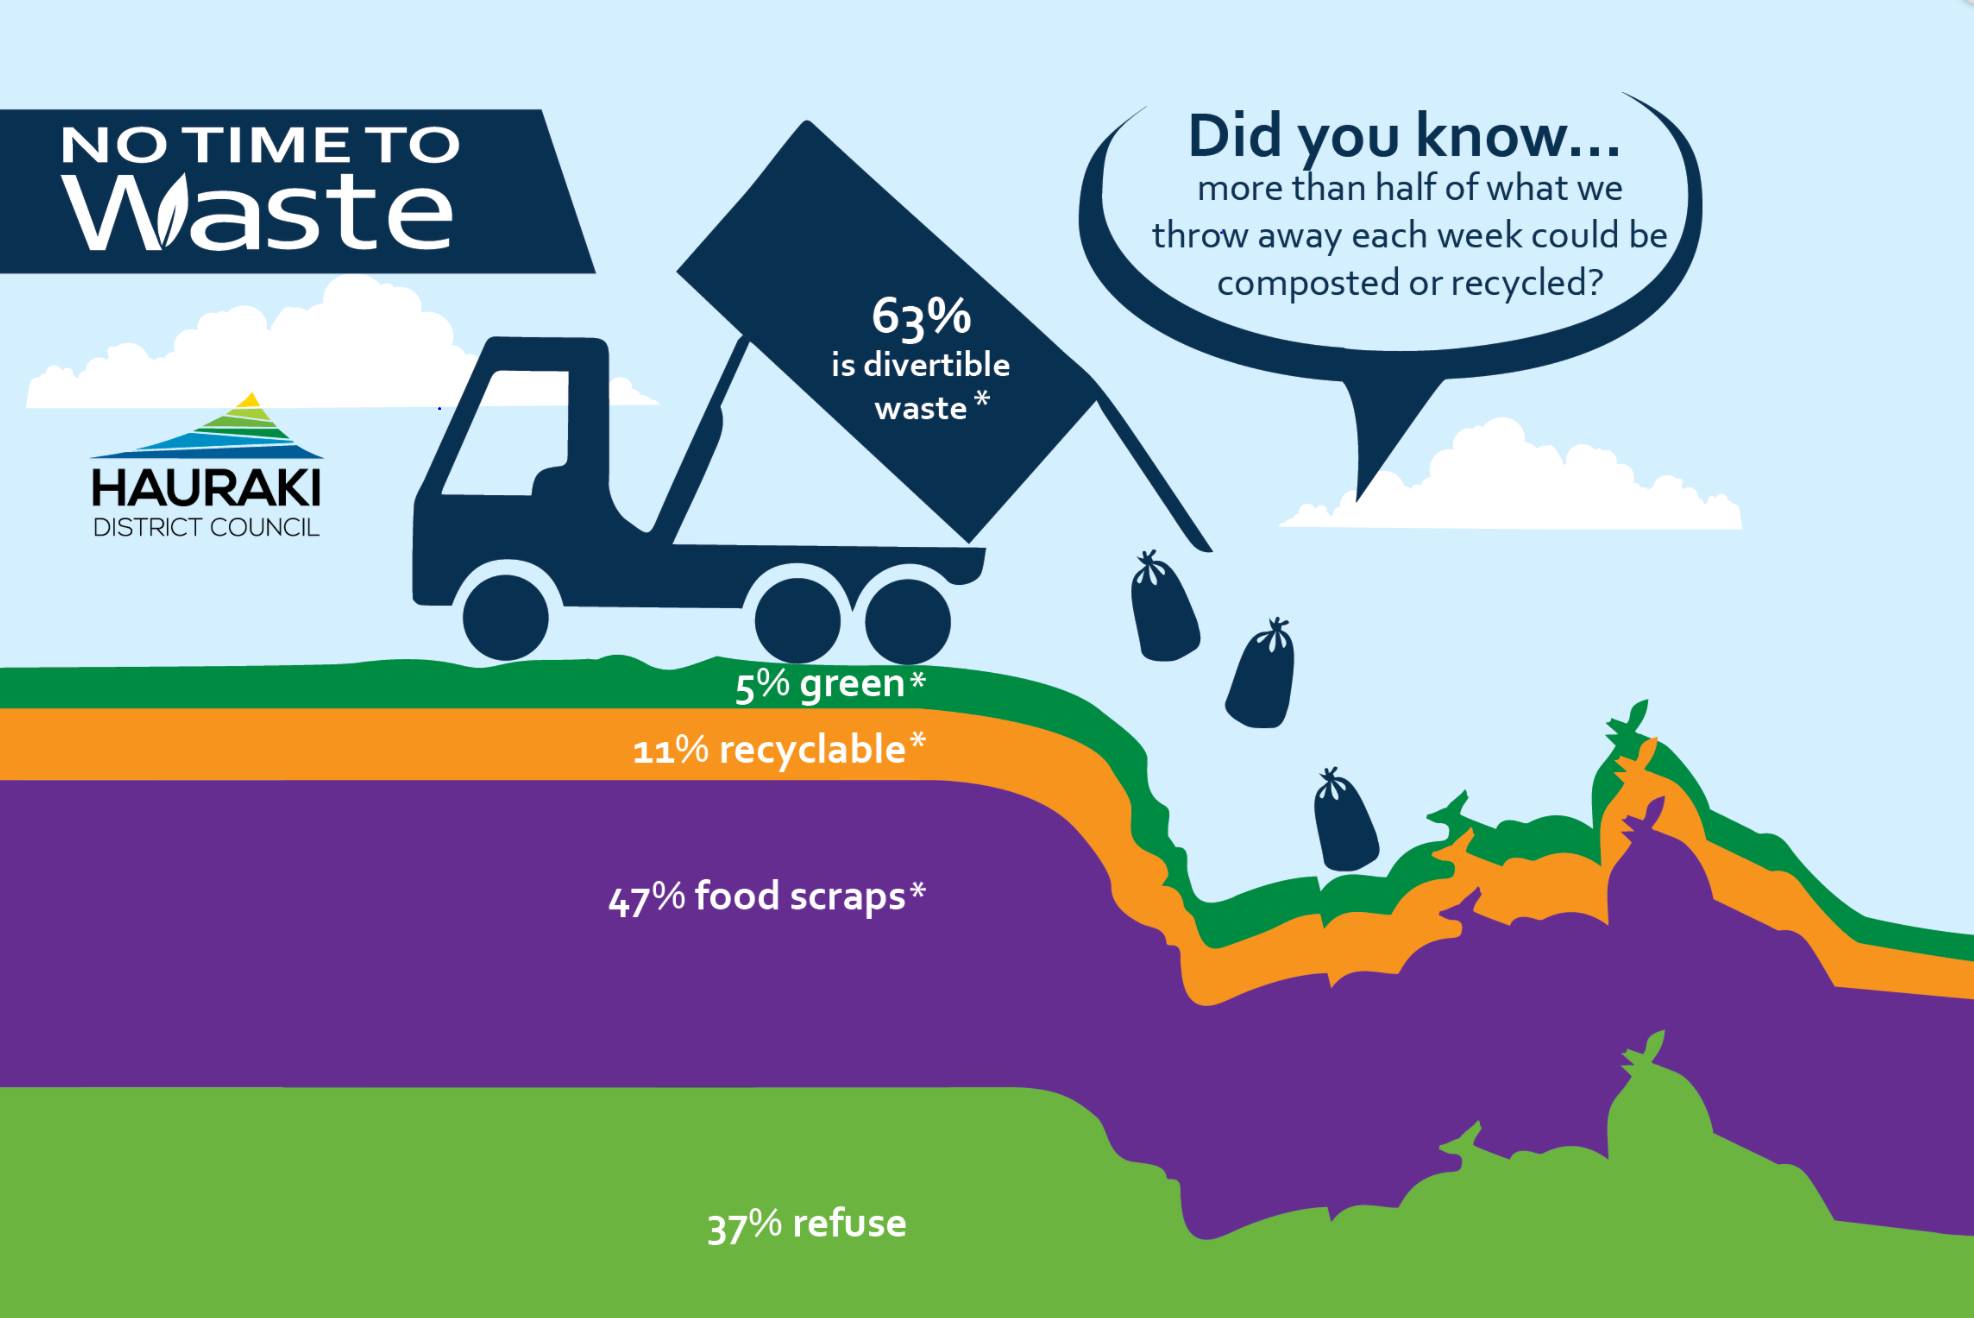 Graphic of a truck tipping rubbish bags into the ground, saying 63% of waste is divertible from landfill